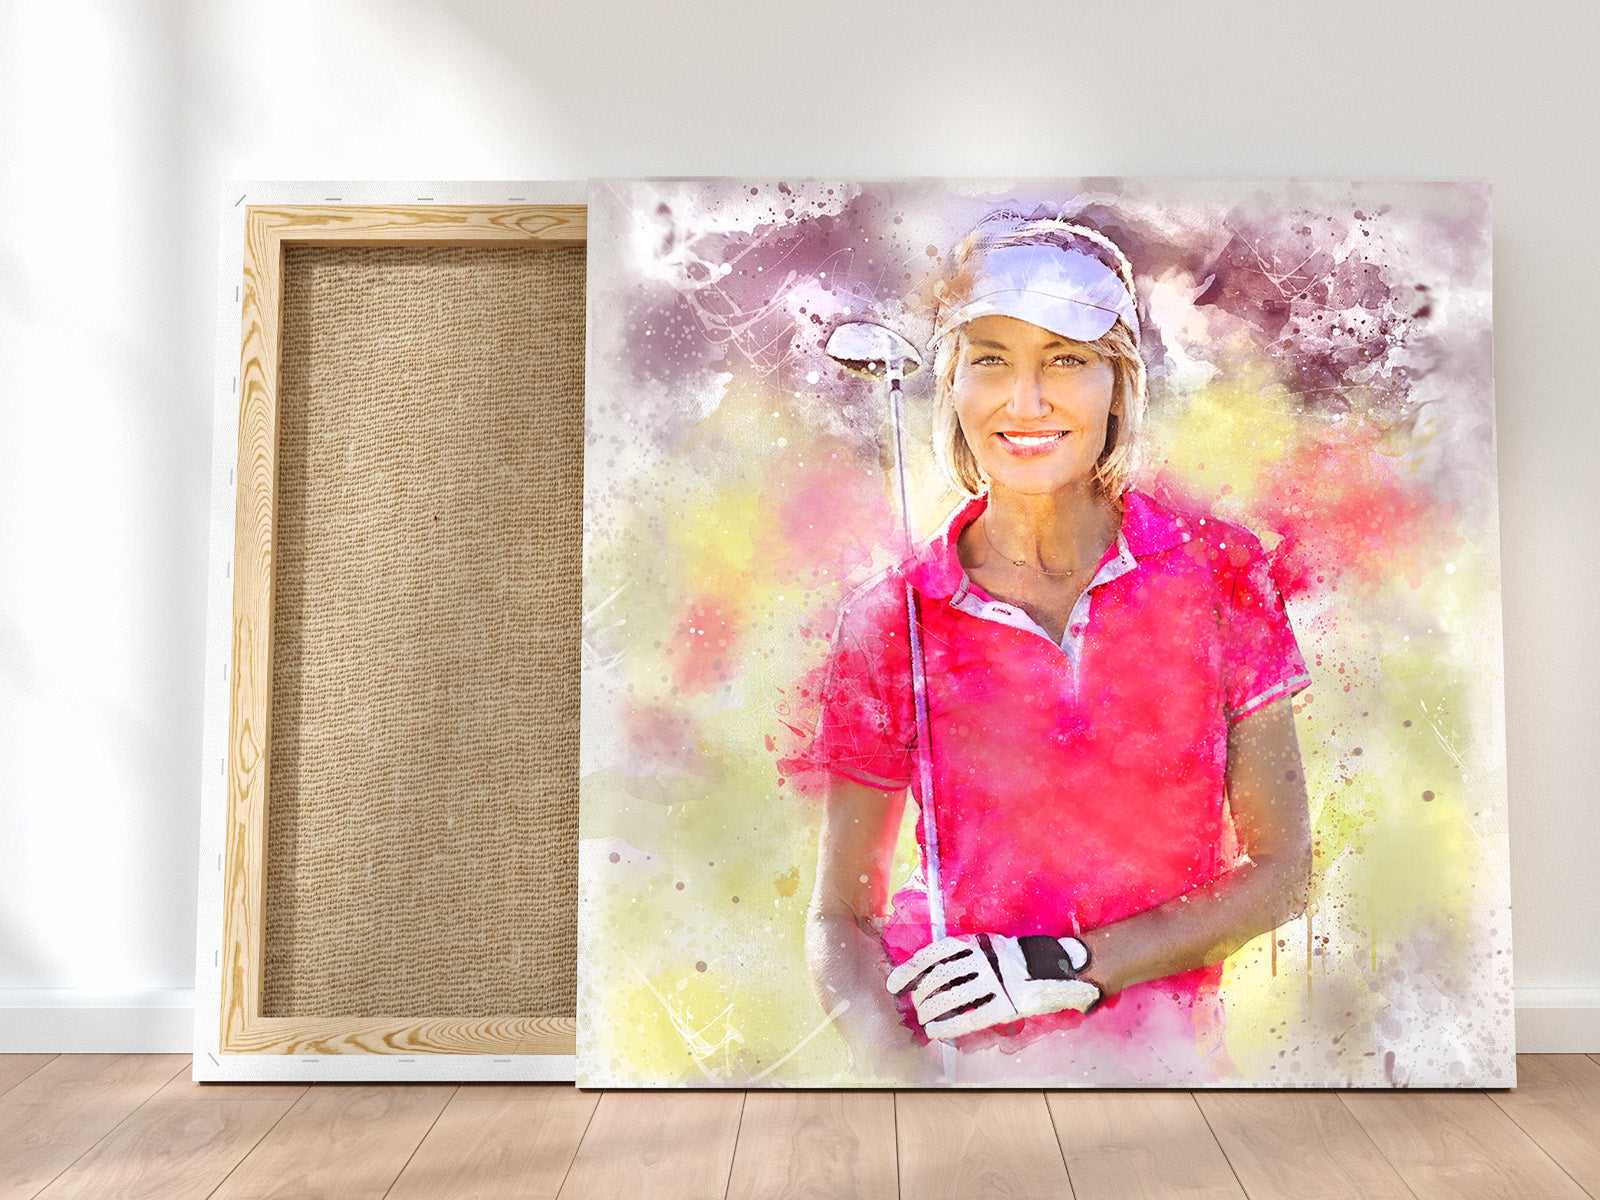 Perfect Gifts for Golf Lovers | Custom Golfer Portraits on Canvas - FromPicToArt